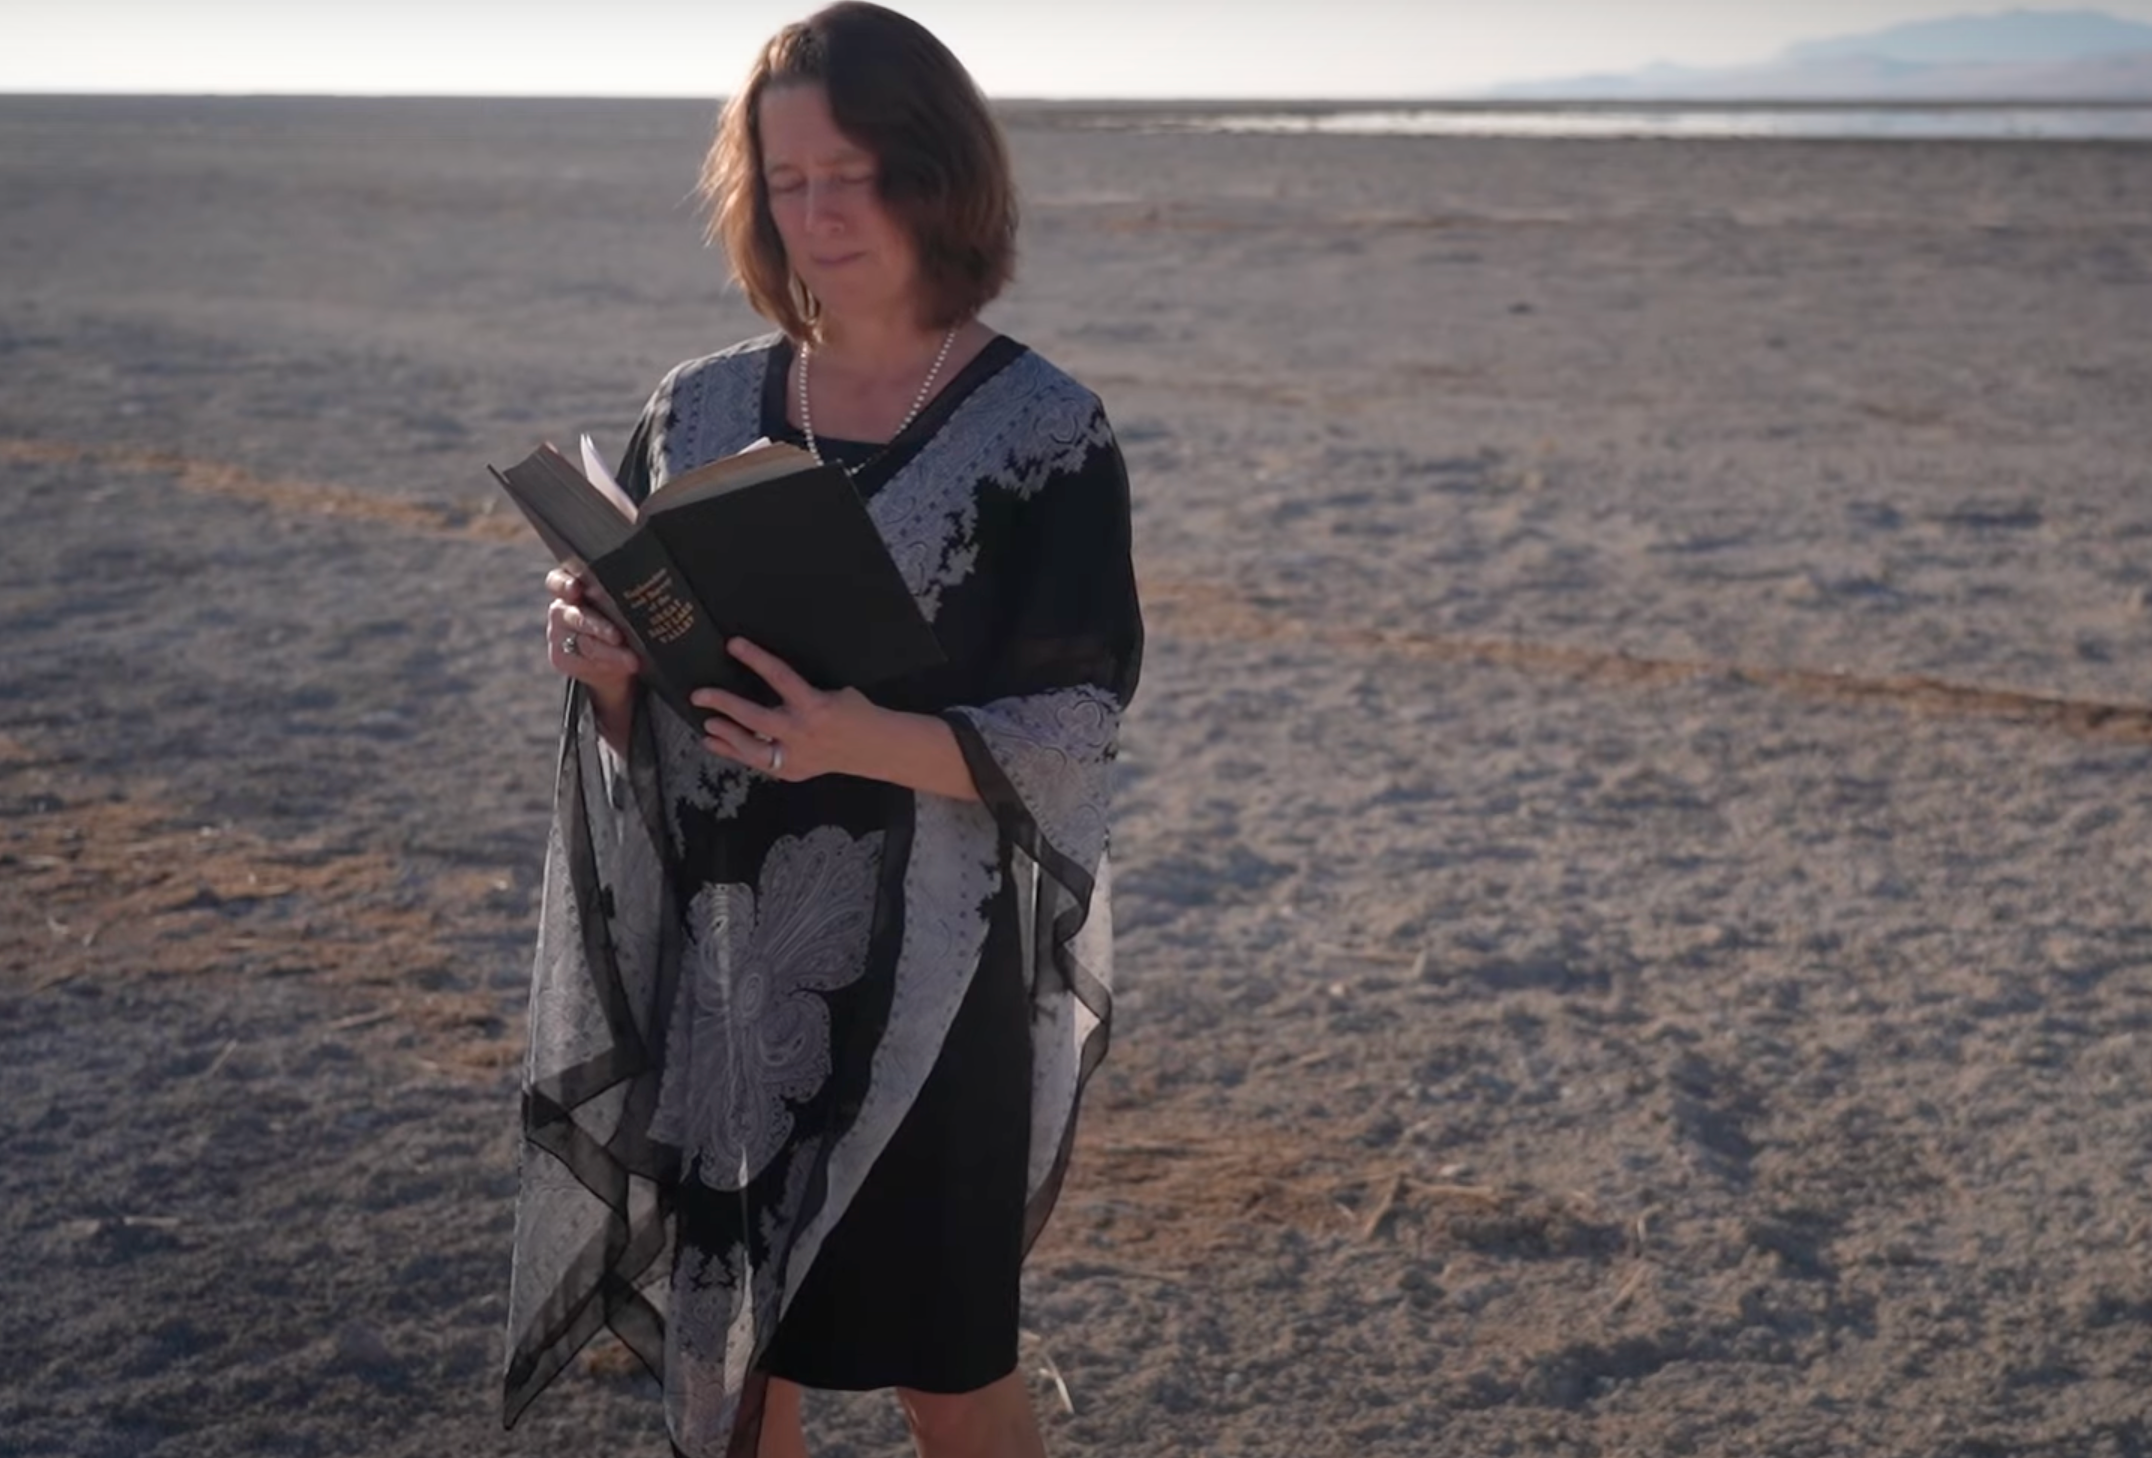 Bonnie Baxter reads an obituary standing on the dry ground where the Great Salt Lake has receded to raise awareness of its plight